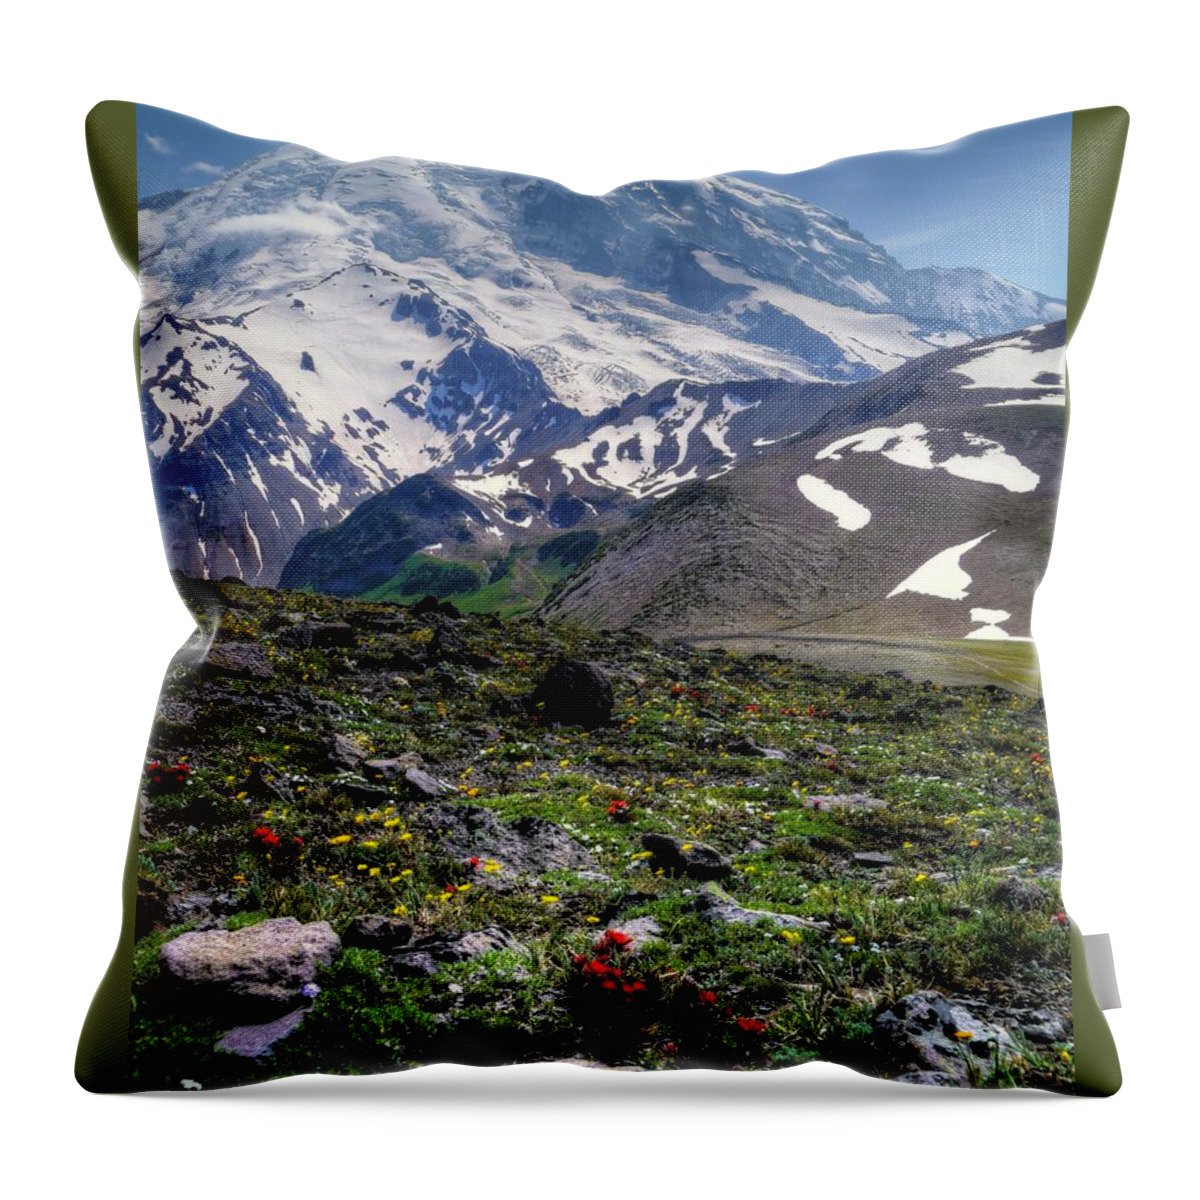 Heavenly Throw Pillow featuring the photograph Heavenly Mountain by Peter Mooyman